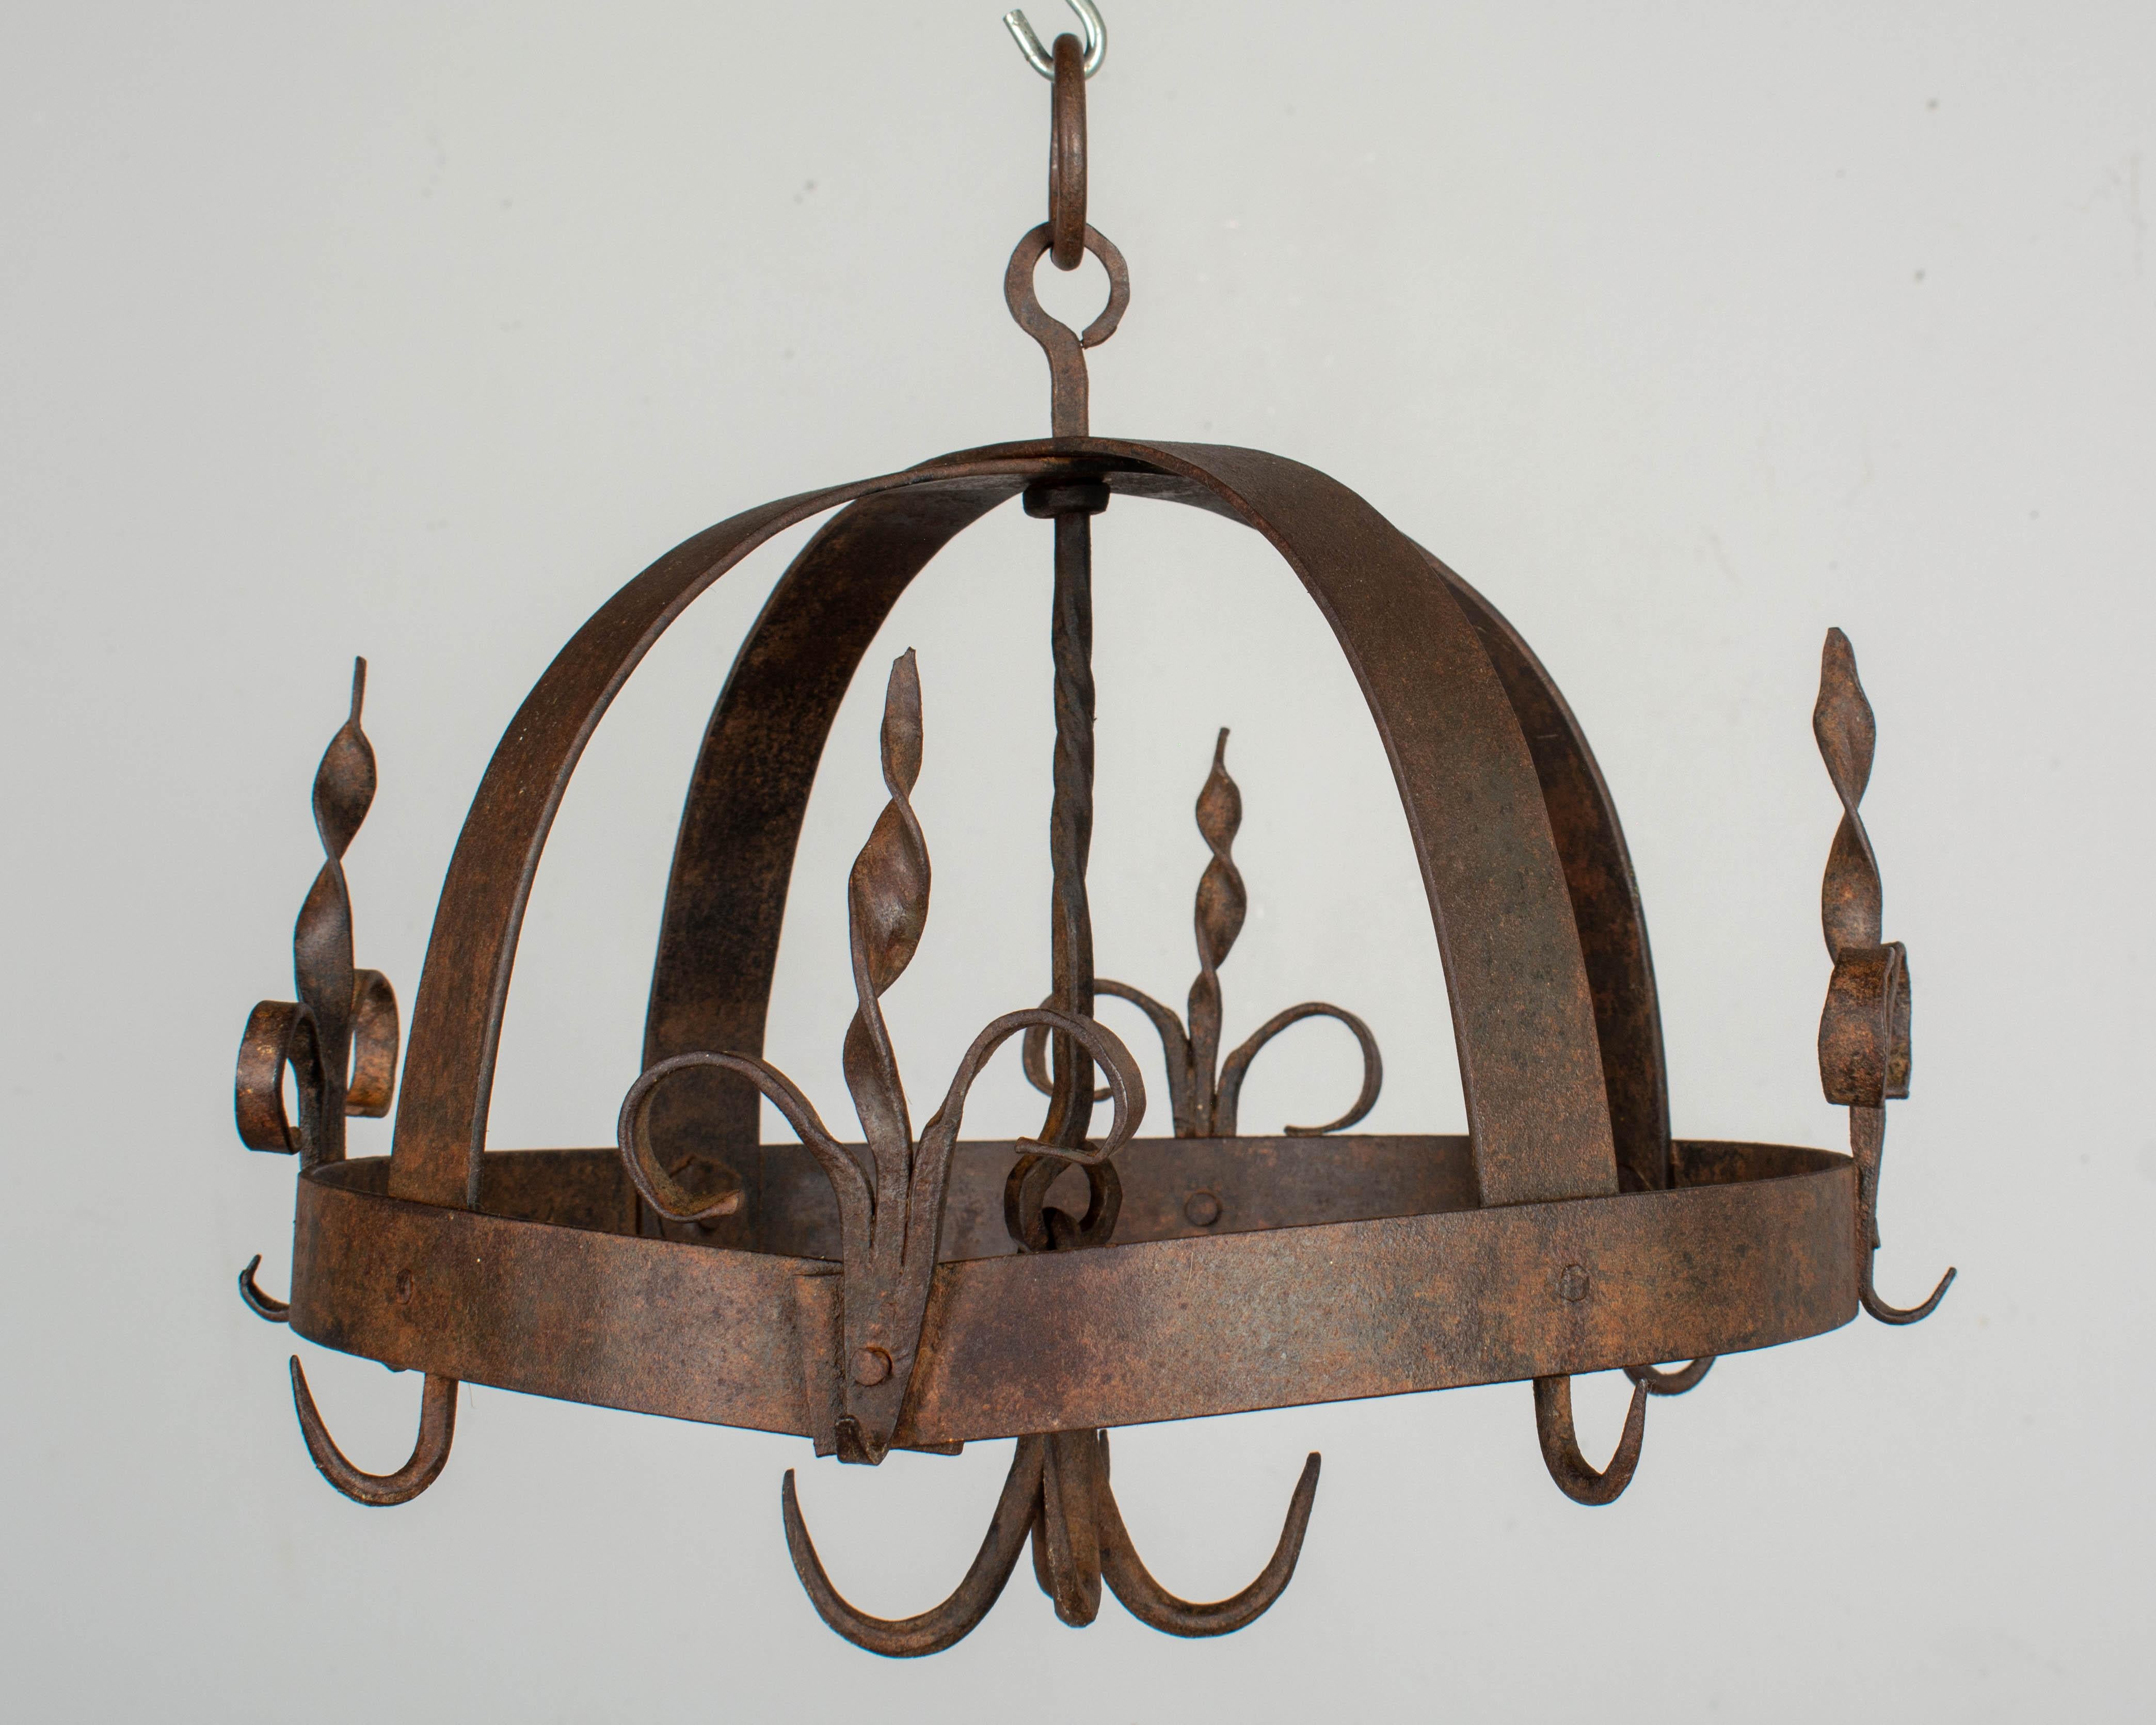 A rustic 19th century French wrought iron hanging pot rack with riveted construction. Four fleur de lis form decorative hooks around the perimeter and a cluster of four hooks dropping from the center.